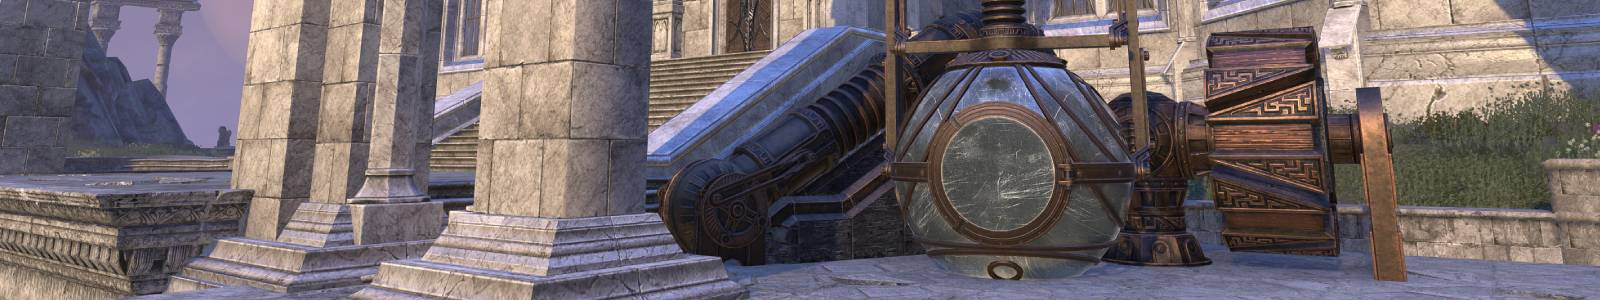 Pipes and Mechanisms - ESO header